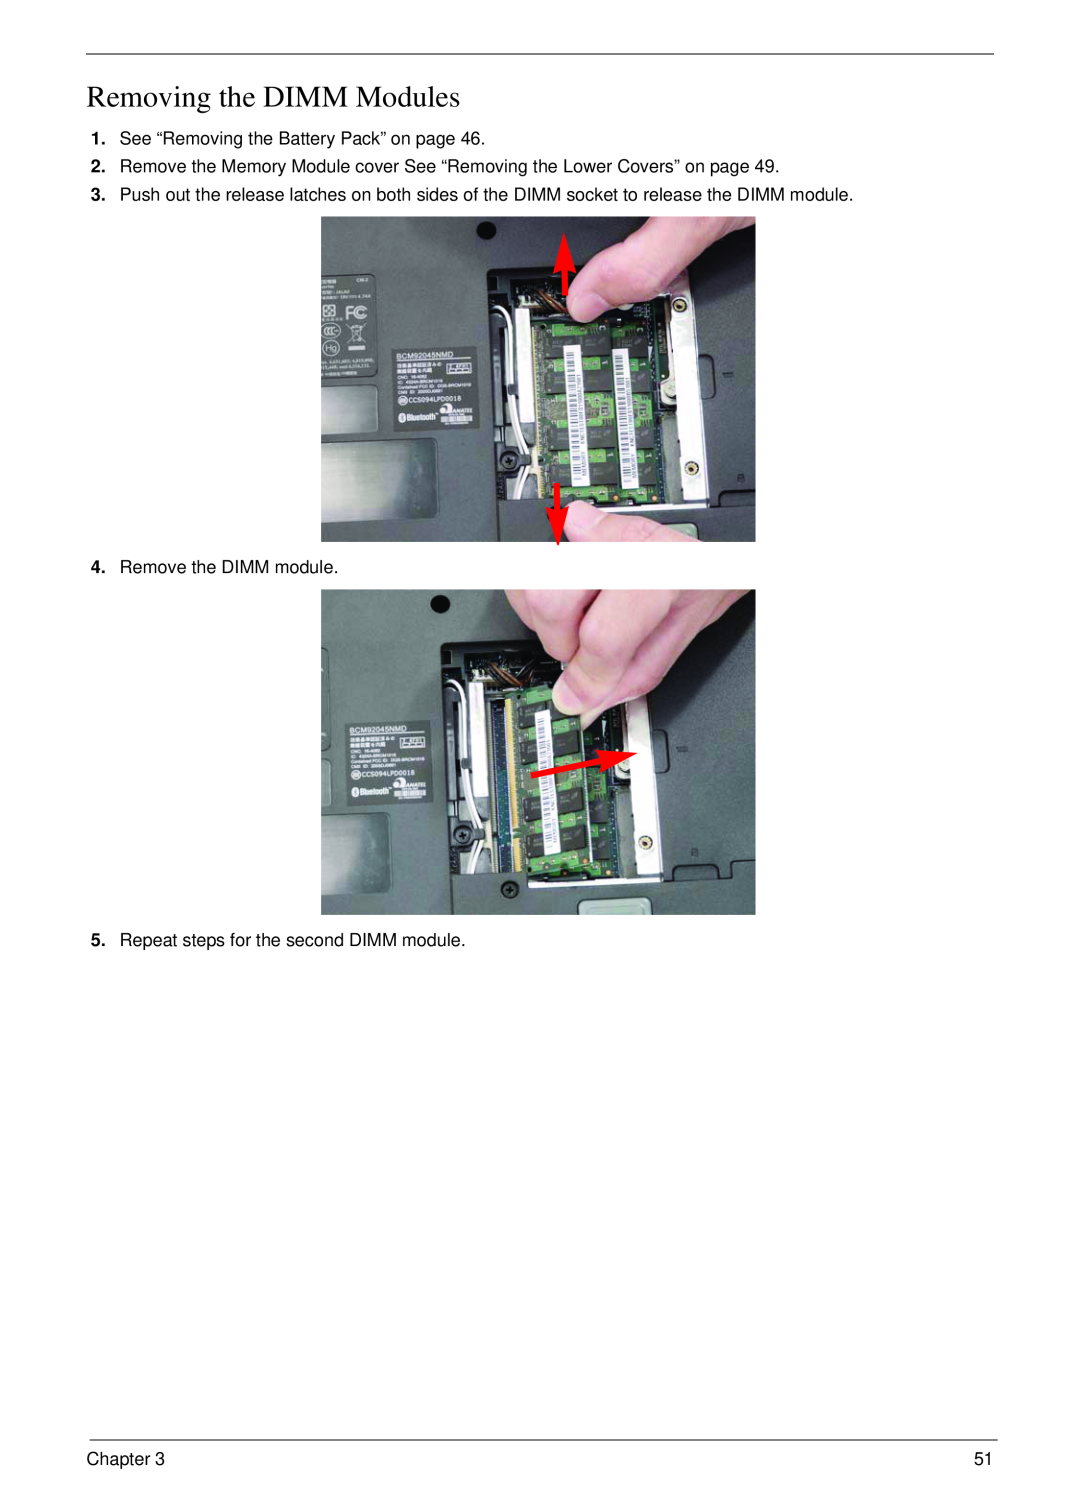 Acer 4730 manual Removing the DIMM Modules, See “Removing the Battery Pack” on page, Chapter 